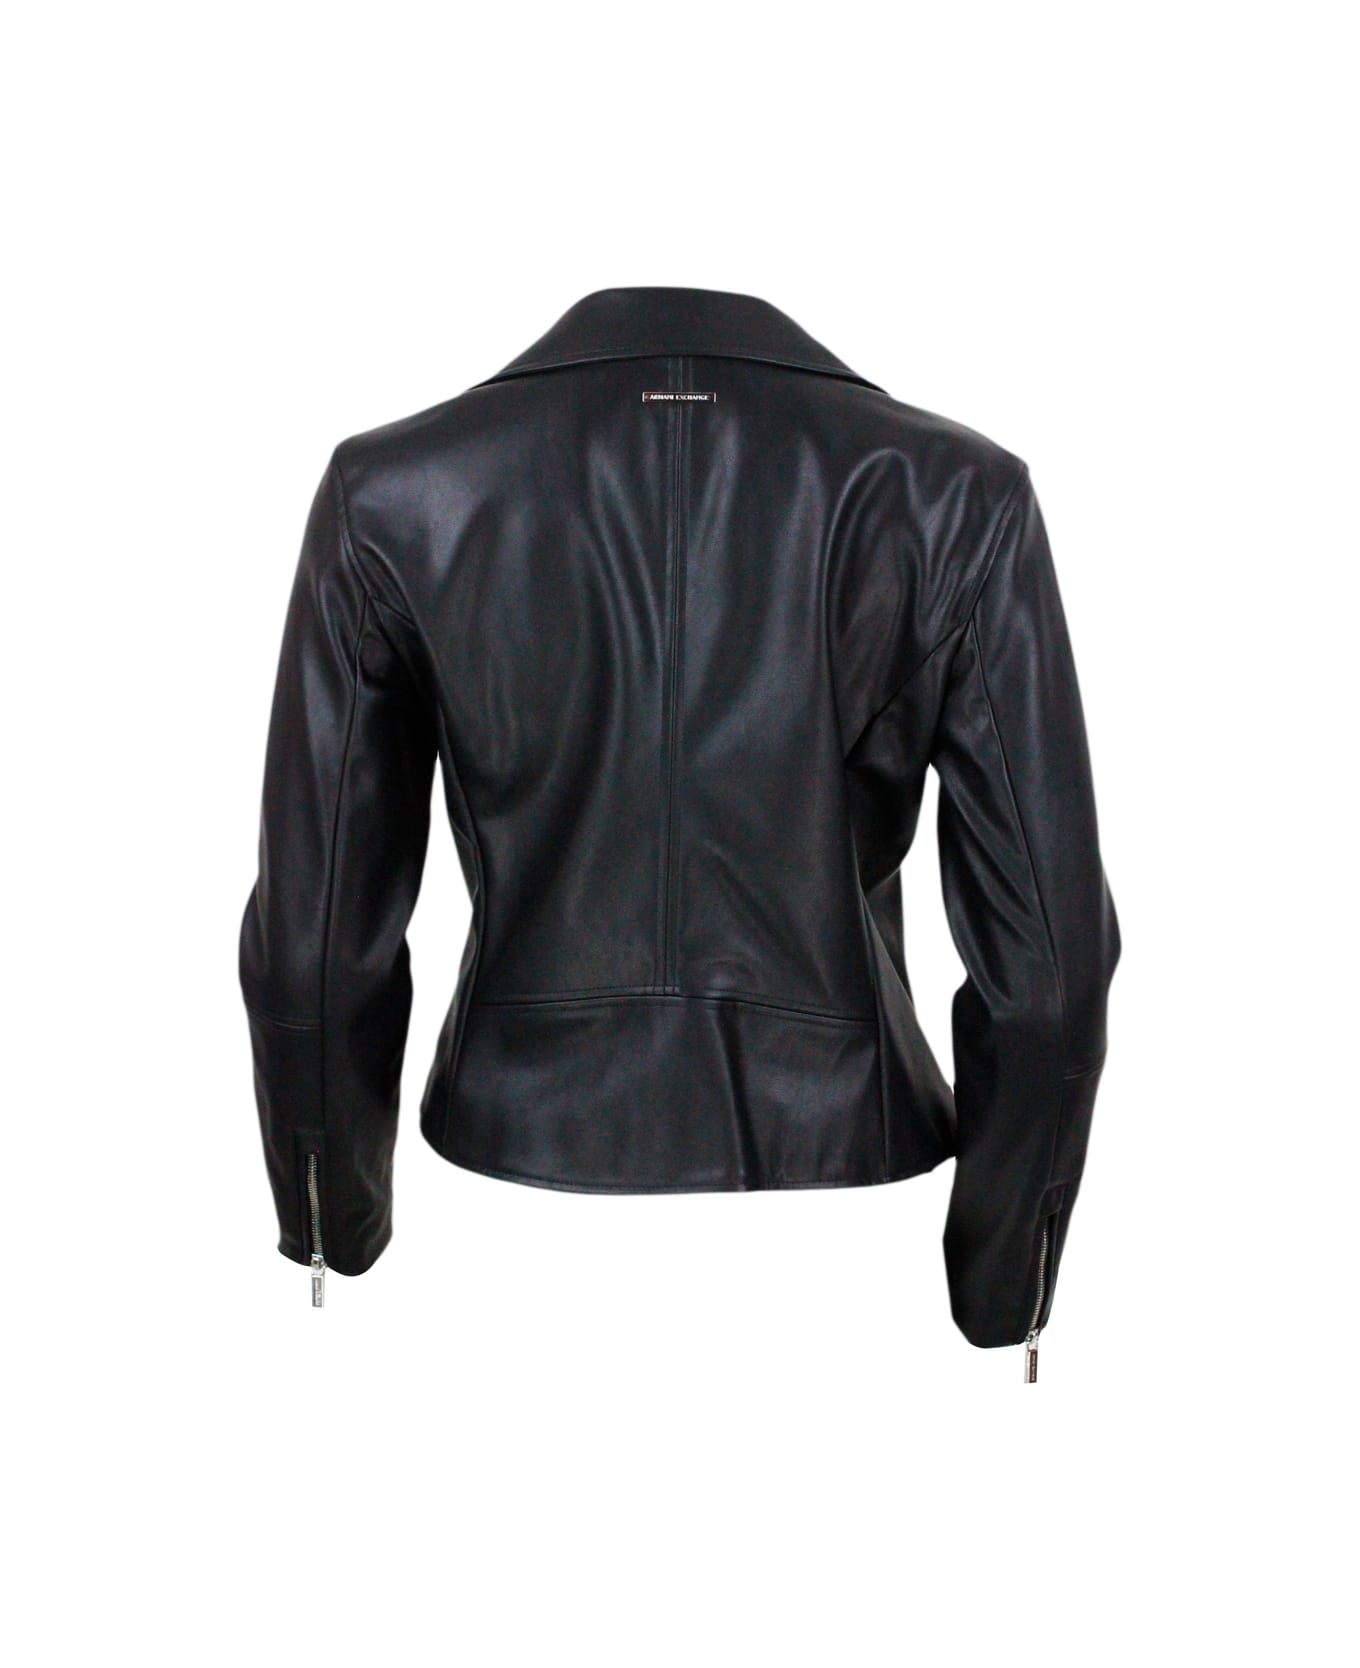 Armani Collezioni Studded Jacket Made Of Eco-leather With Zip Closure And Zips On The Cuffs And Pockets - Black レザージャケット